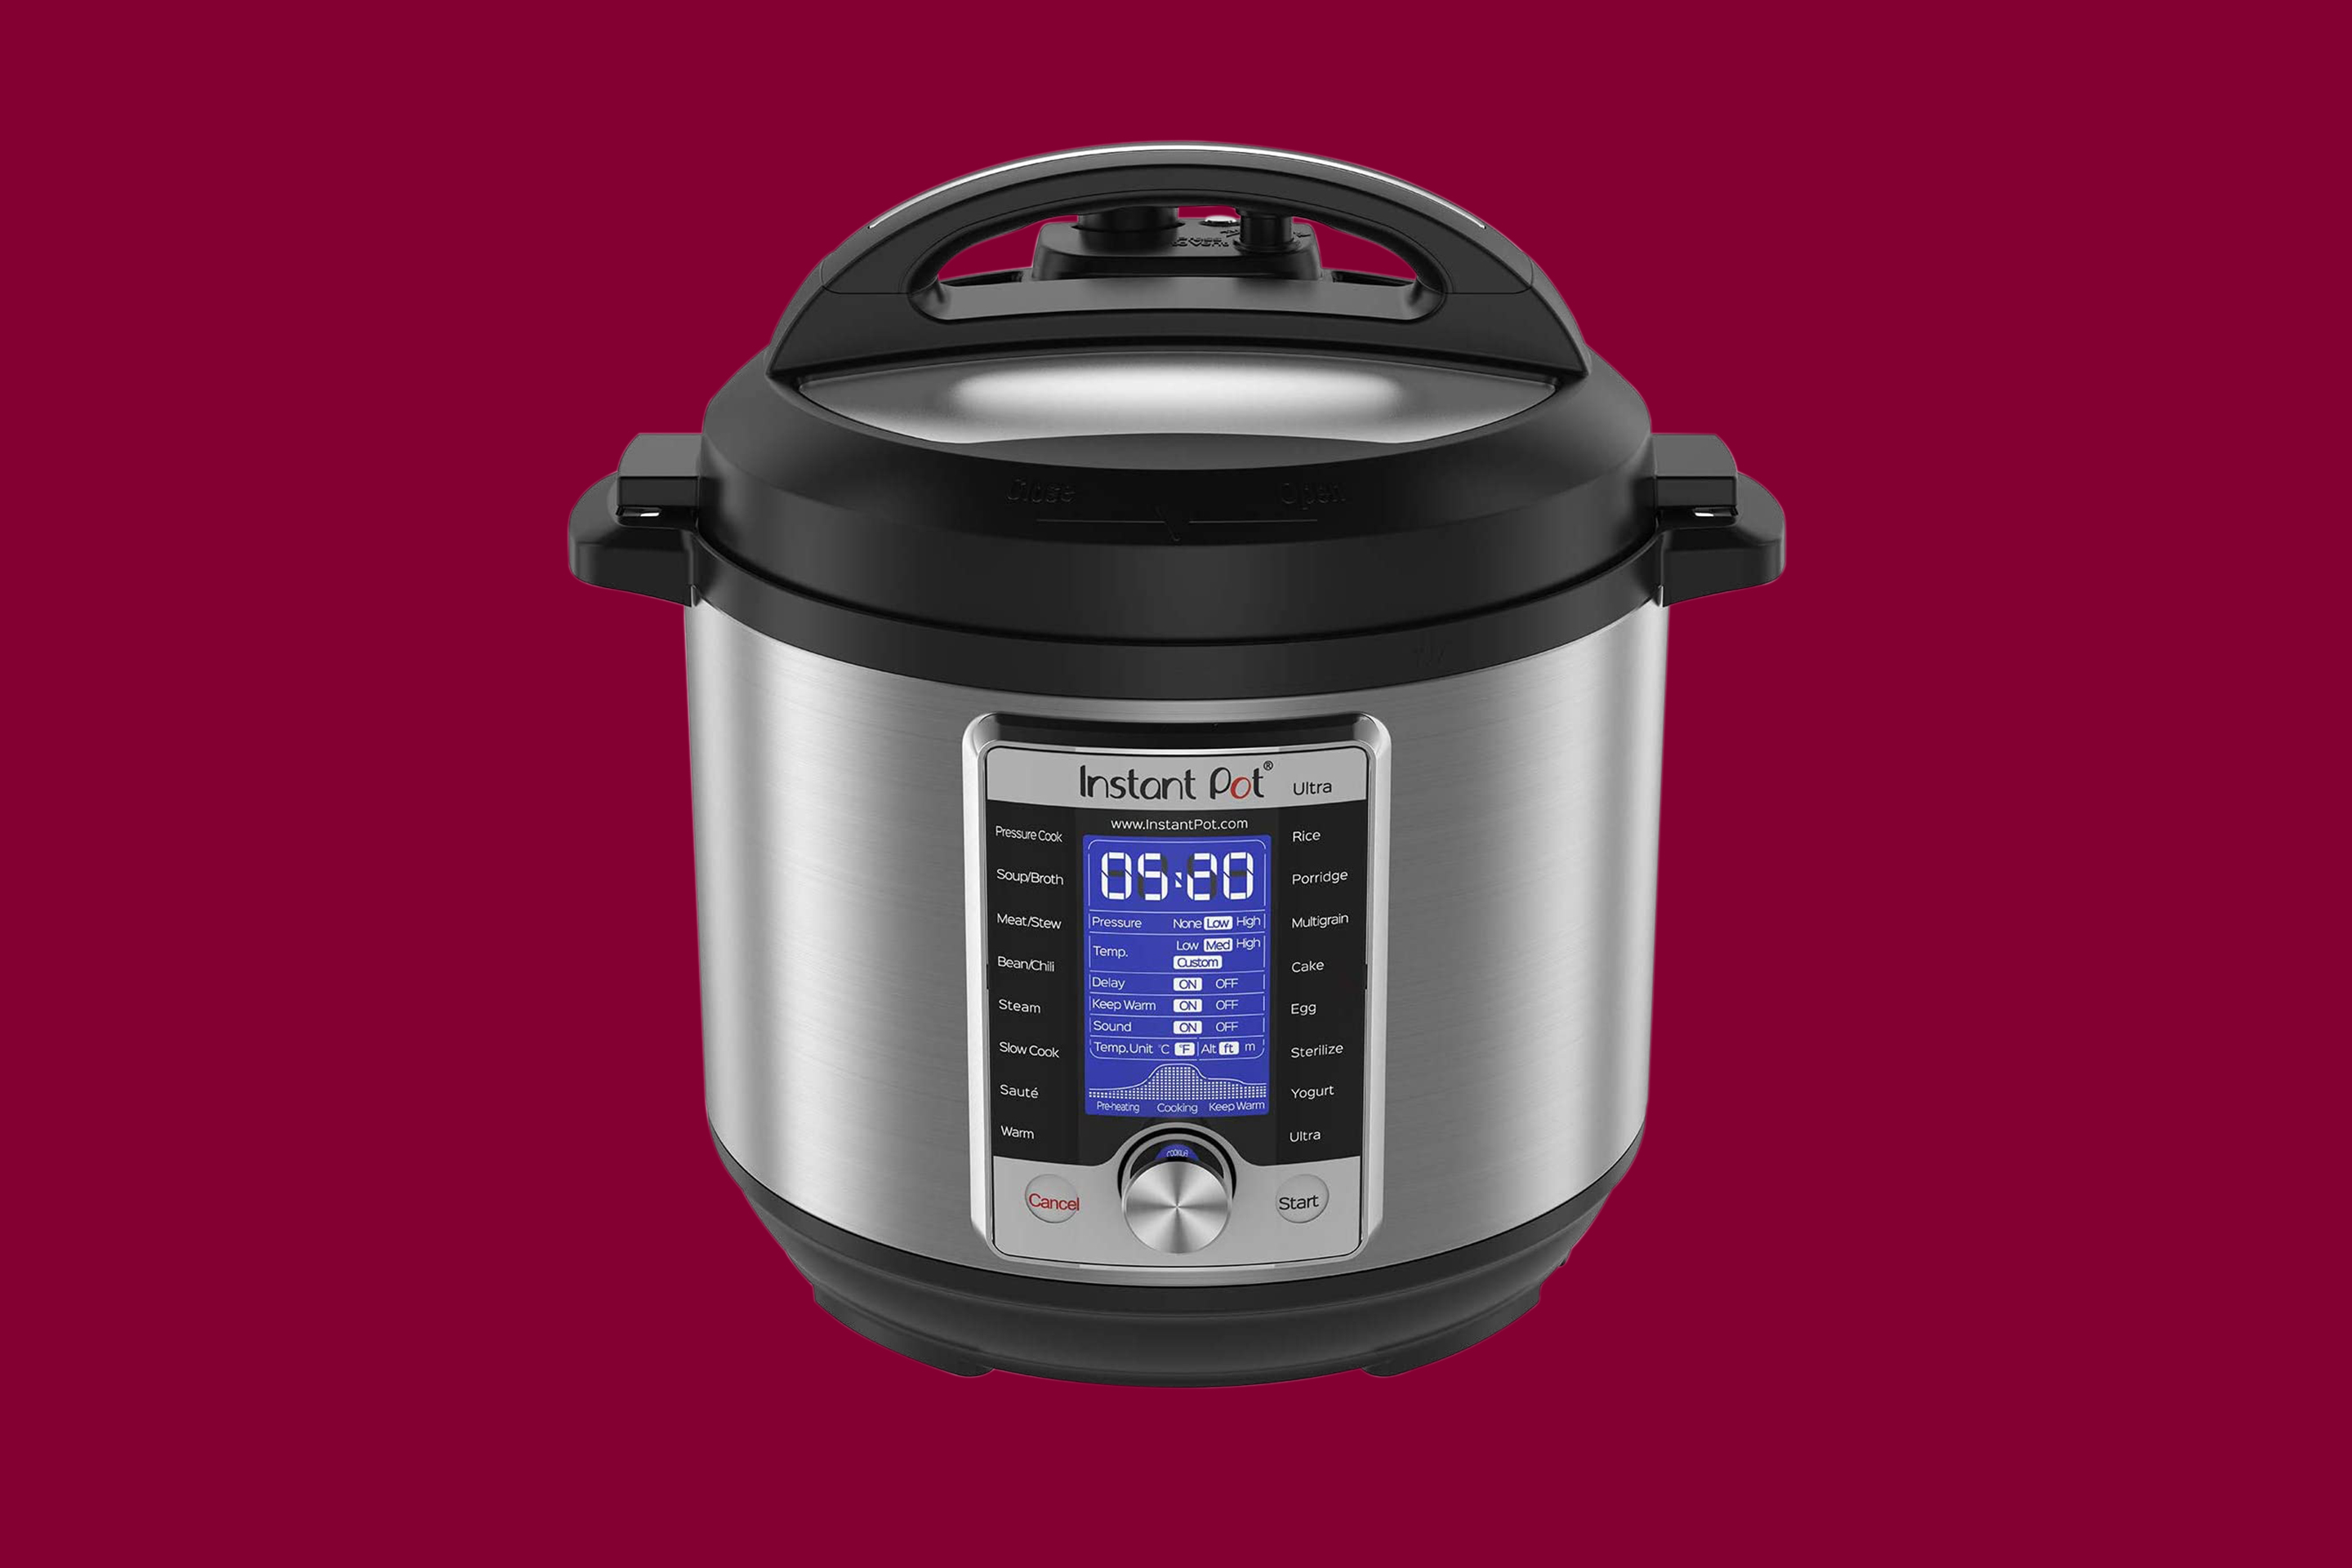 The Best Pressure Cookers for Your Money